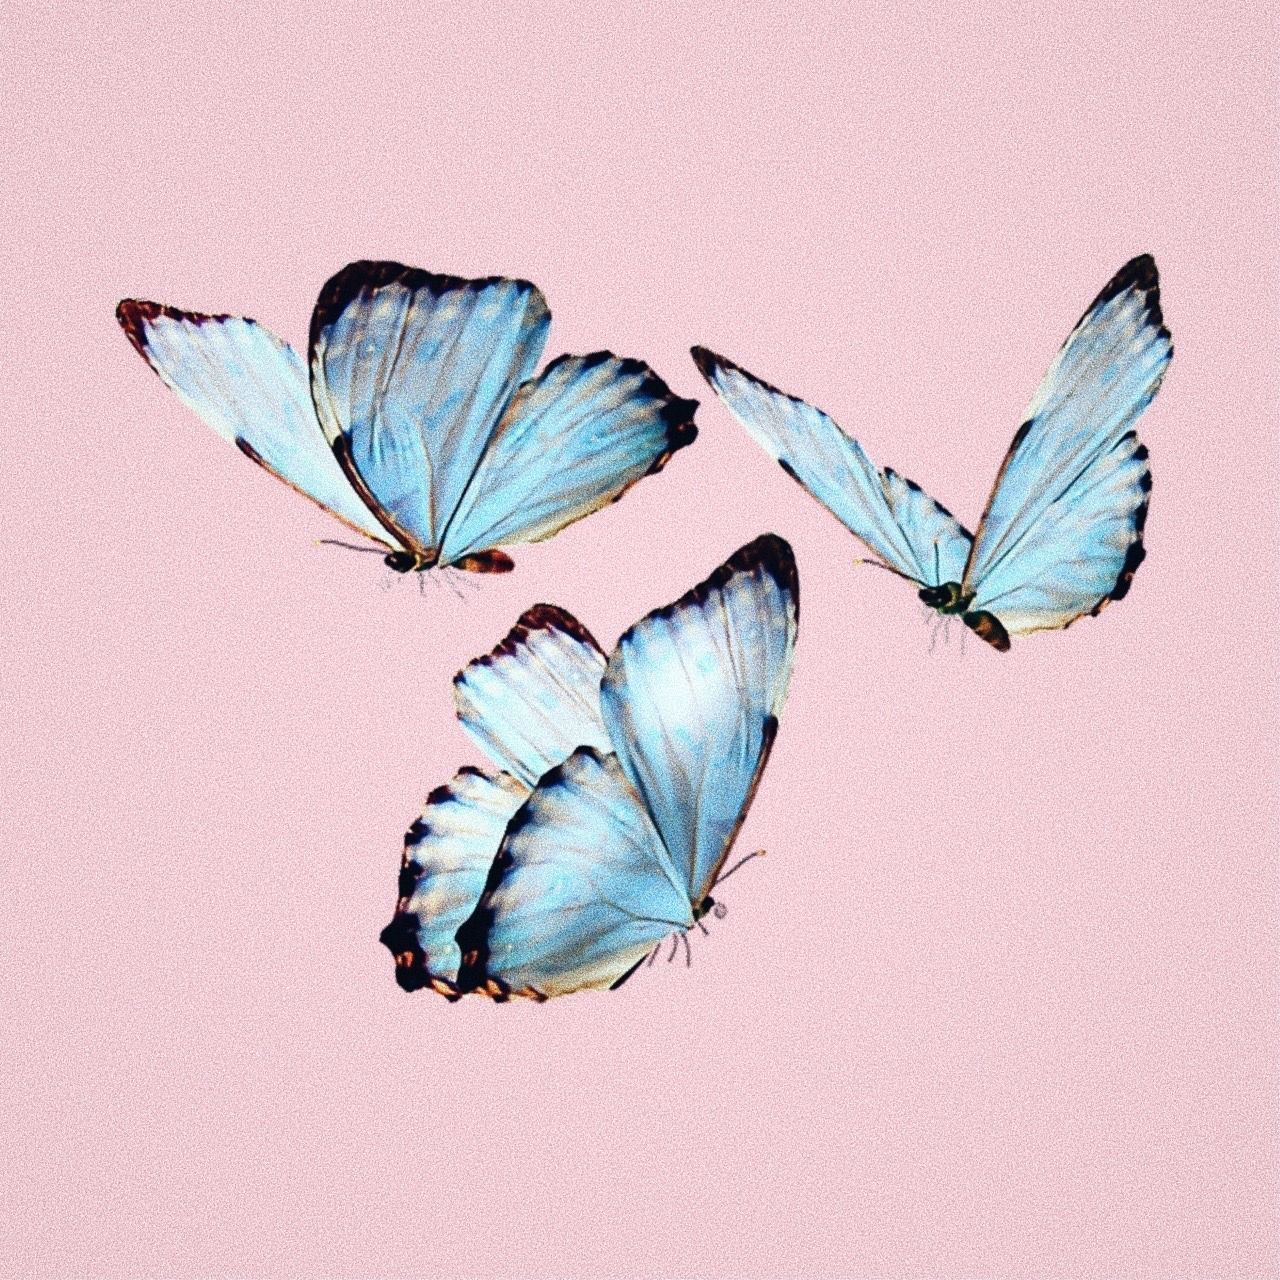 Pink Butterfly Wallpaper Aesthetic, Find Image Of Pink Butterfly